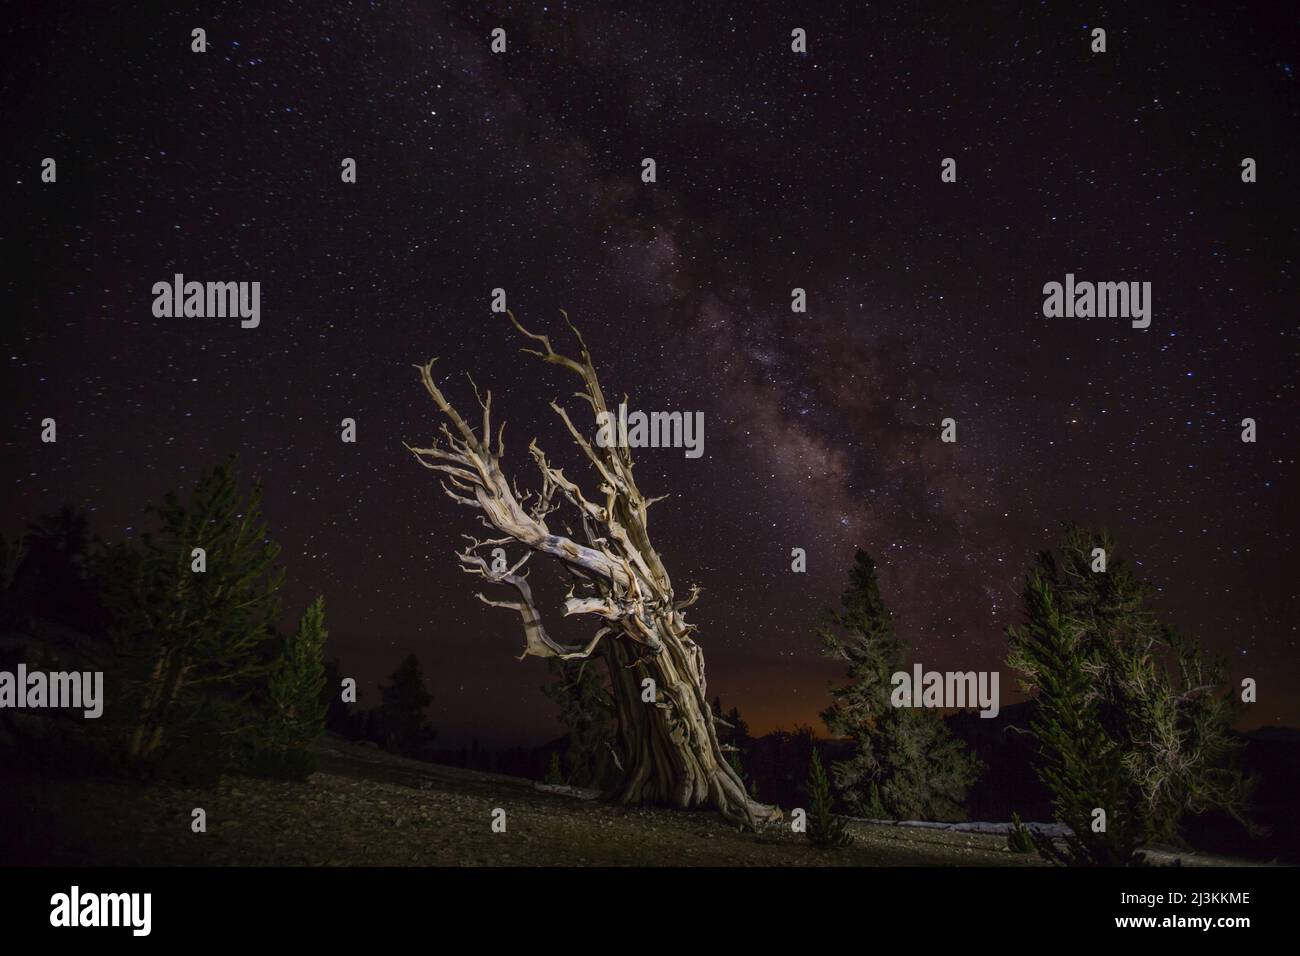 A bristlecone pine and the milky way. Stock Photo